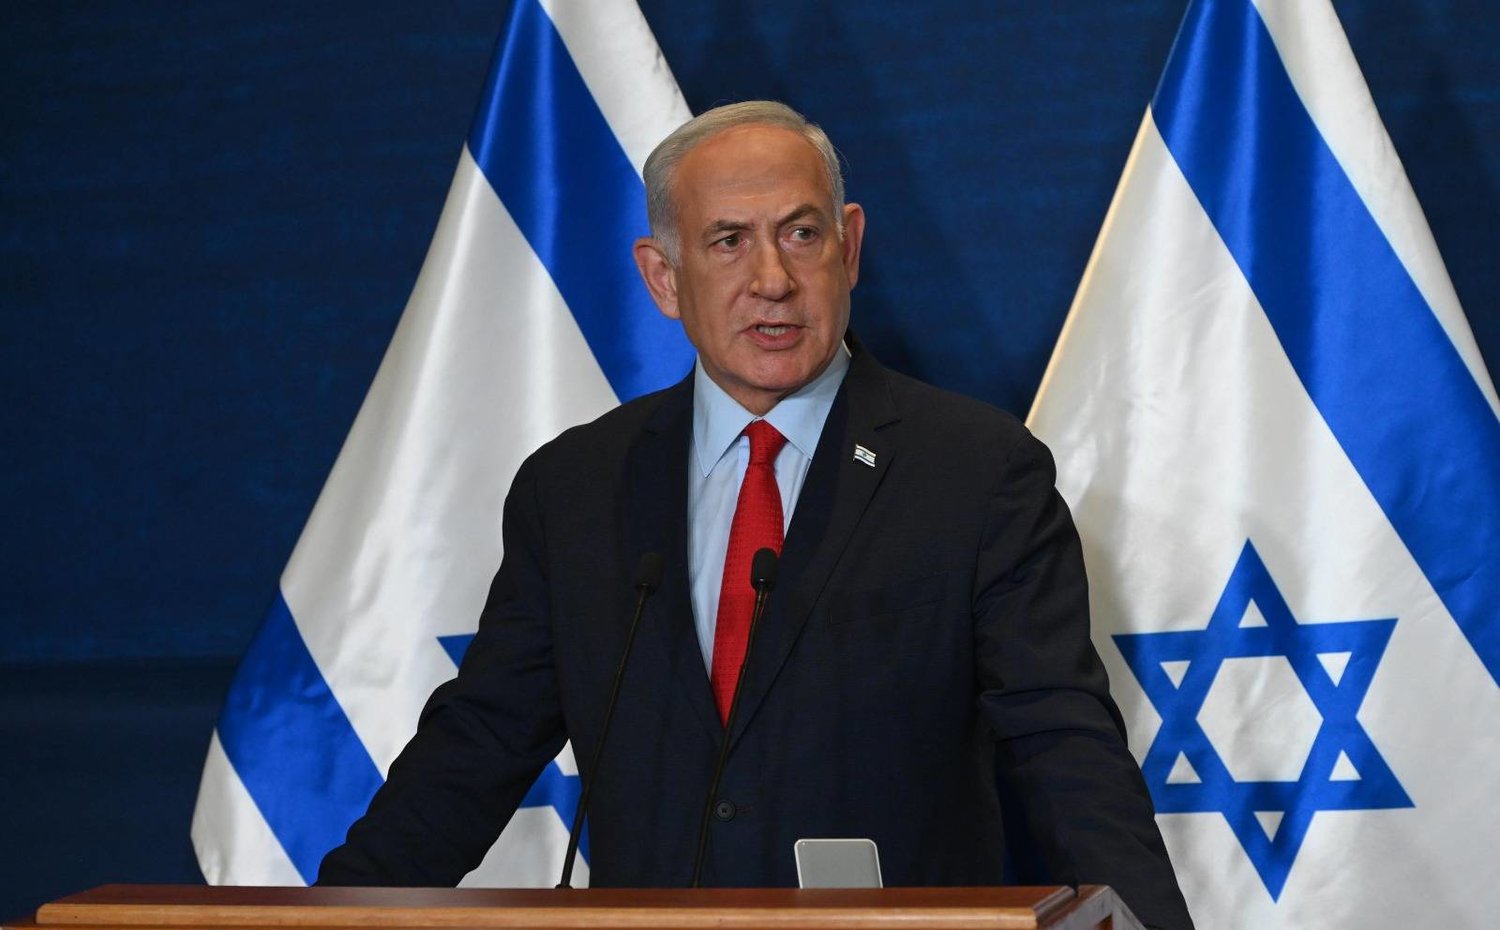 Norway says it is obliged to arrest Netanyahu if ICC warrant confirmed